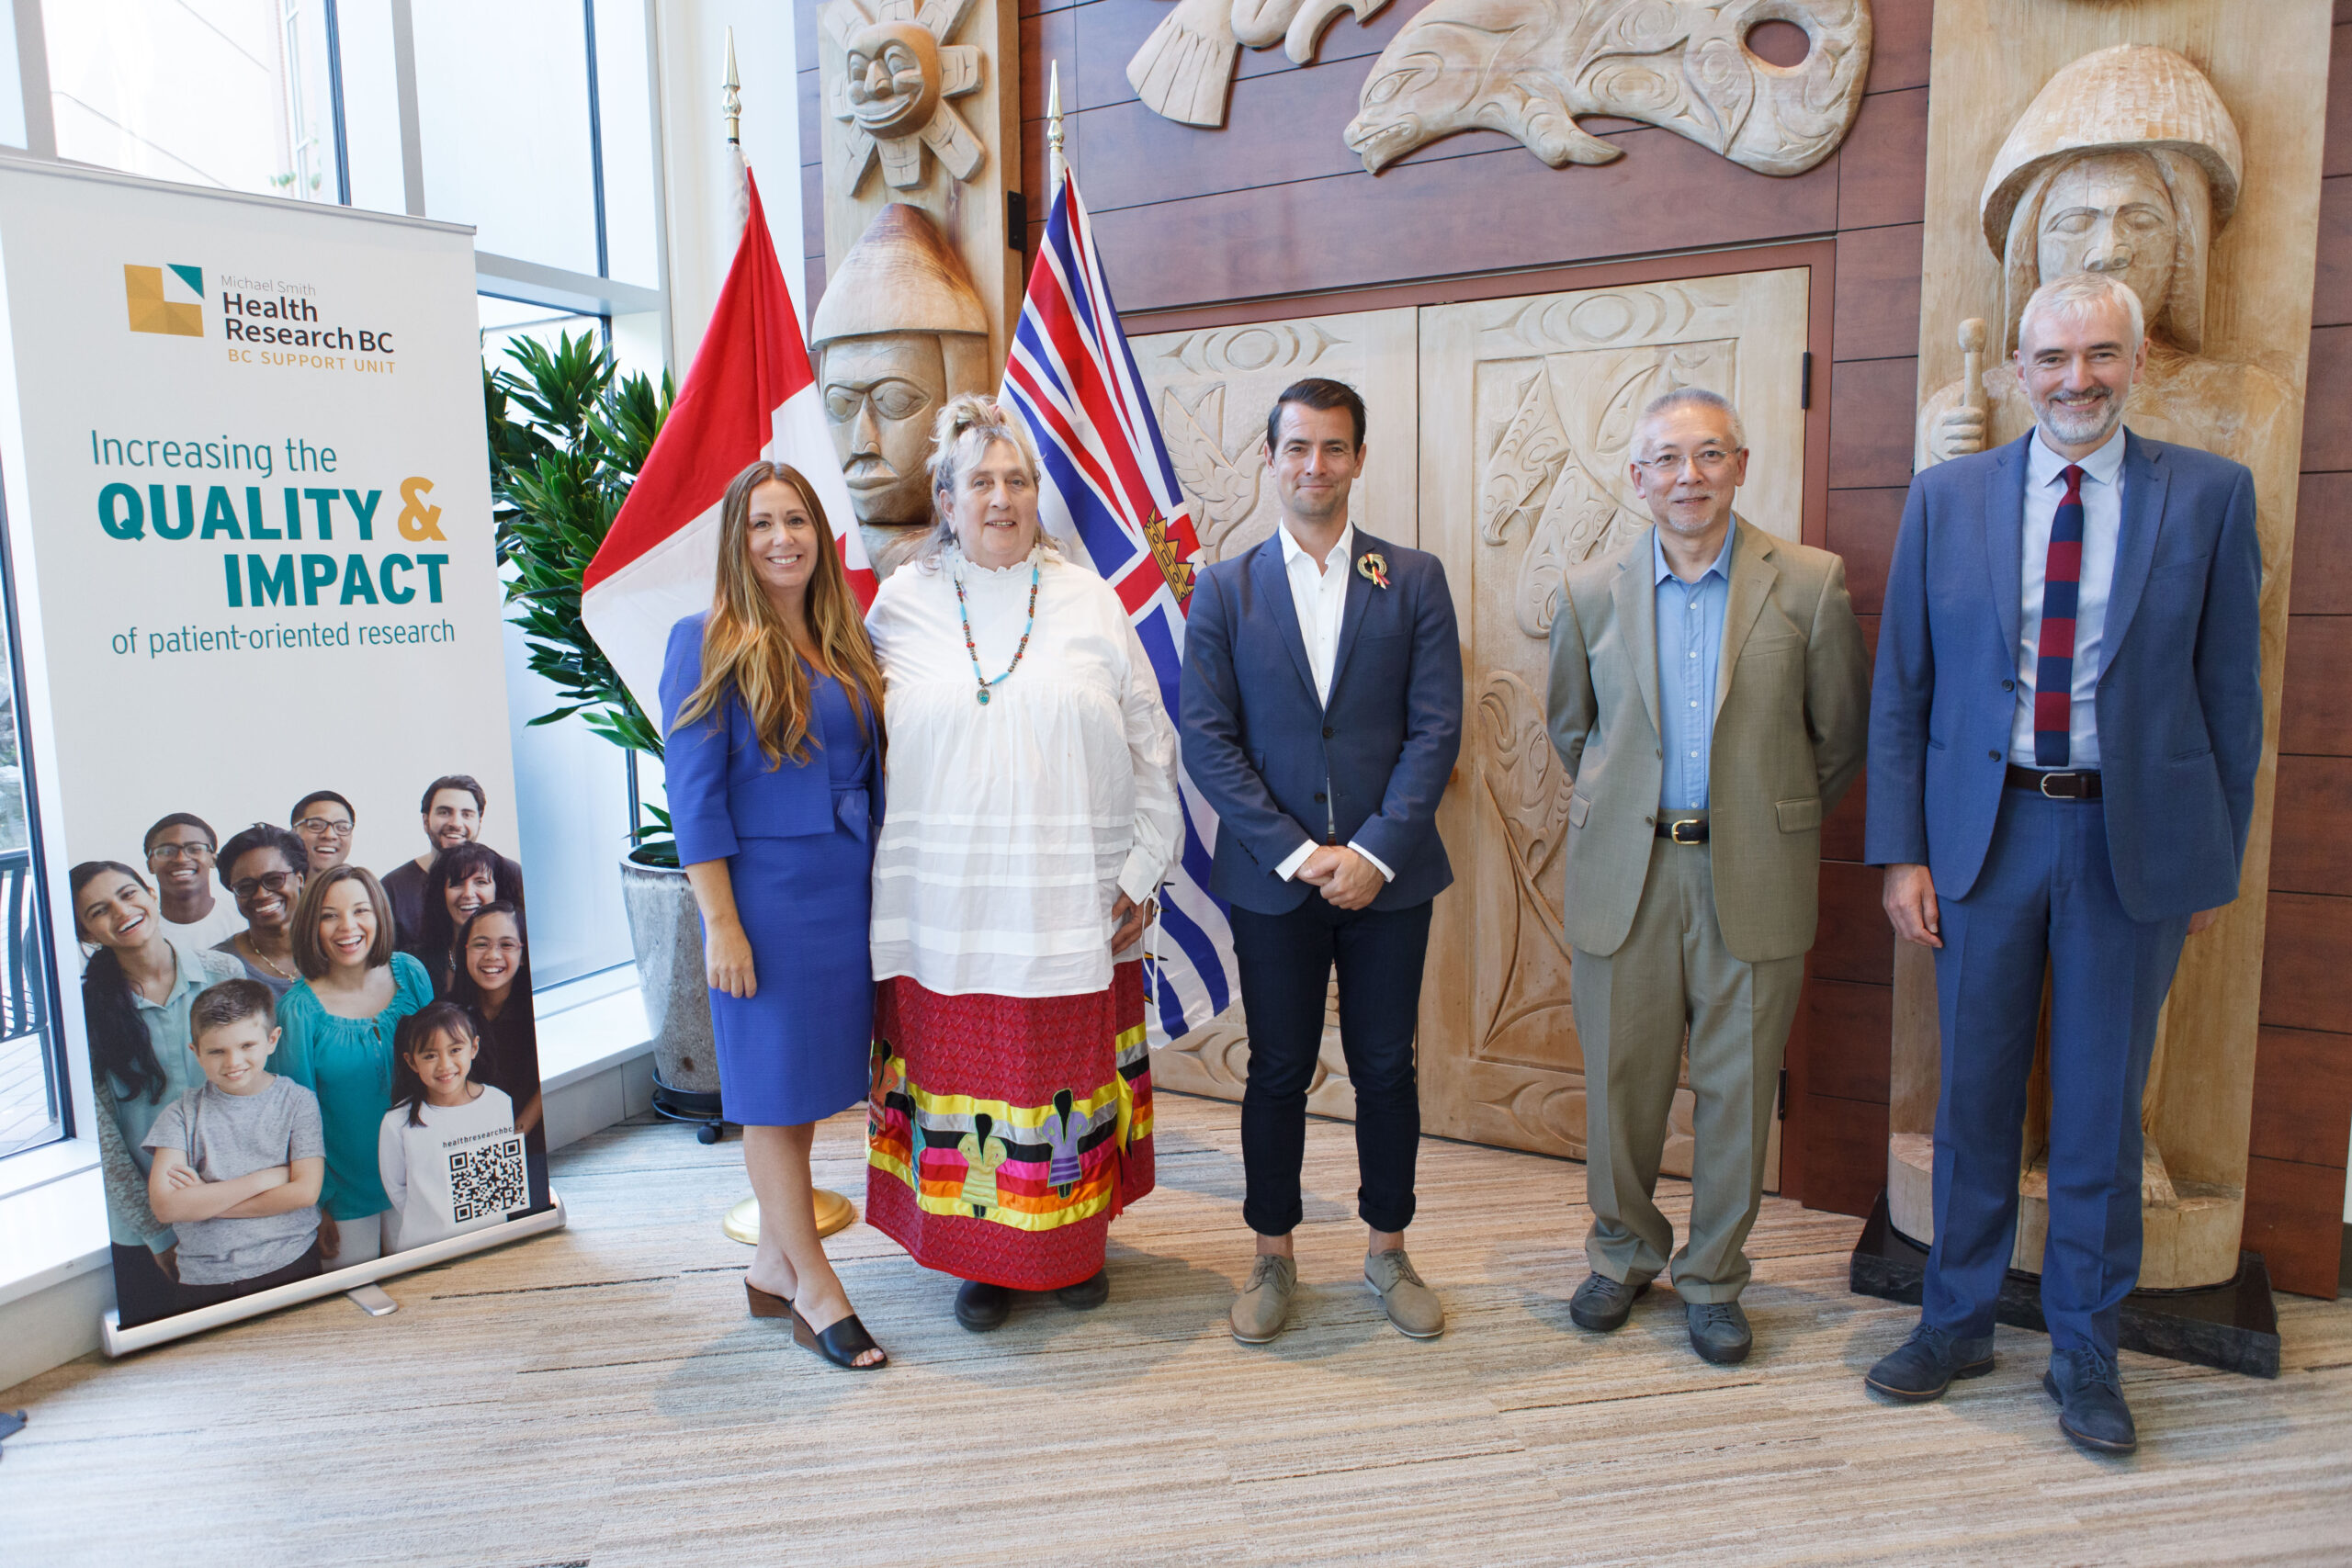 Representatives from Island Health, Curve Lake First Nations, the federal government and Michael Smith Health Research BC stand in front of the All Nations Healing Room at Royal Jubilee Hospital, Victoria BC.